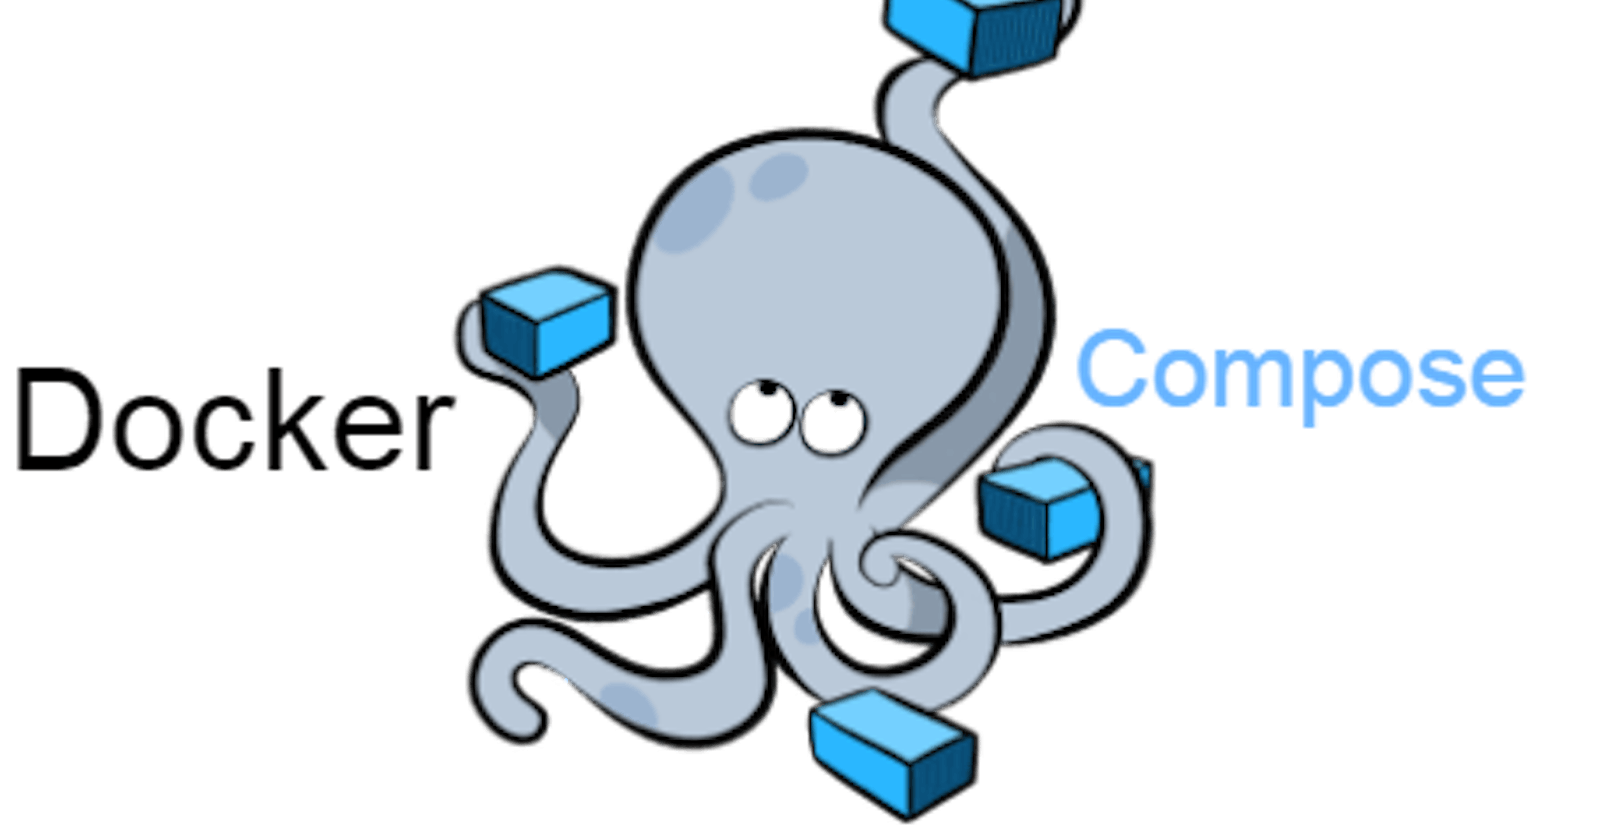 Deploying an app with Docker and Docker compose